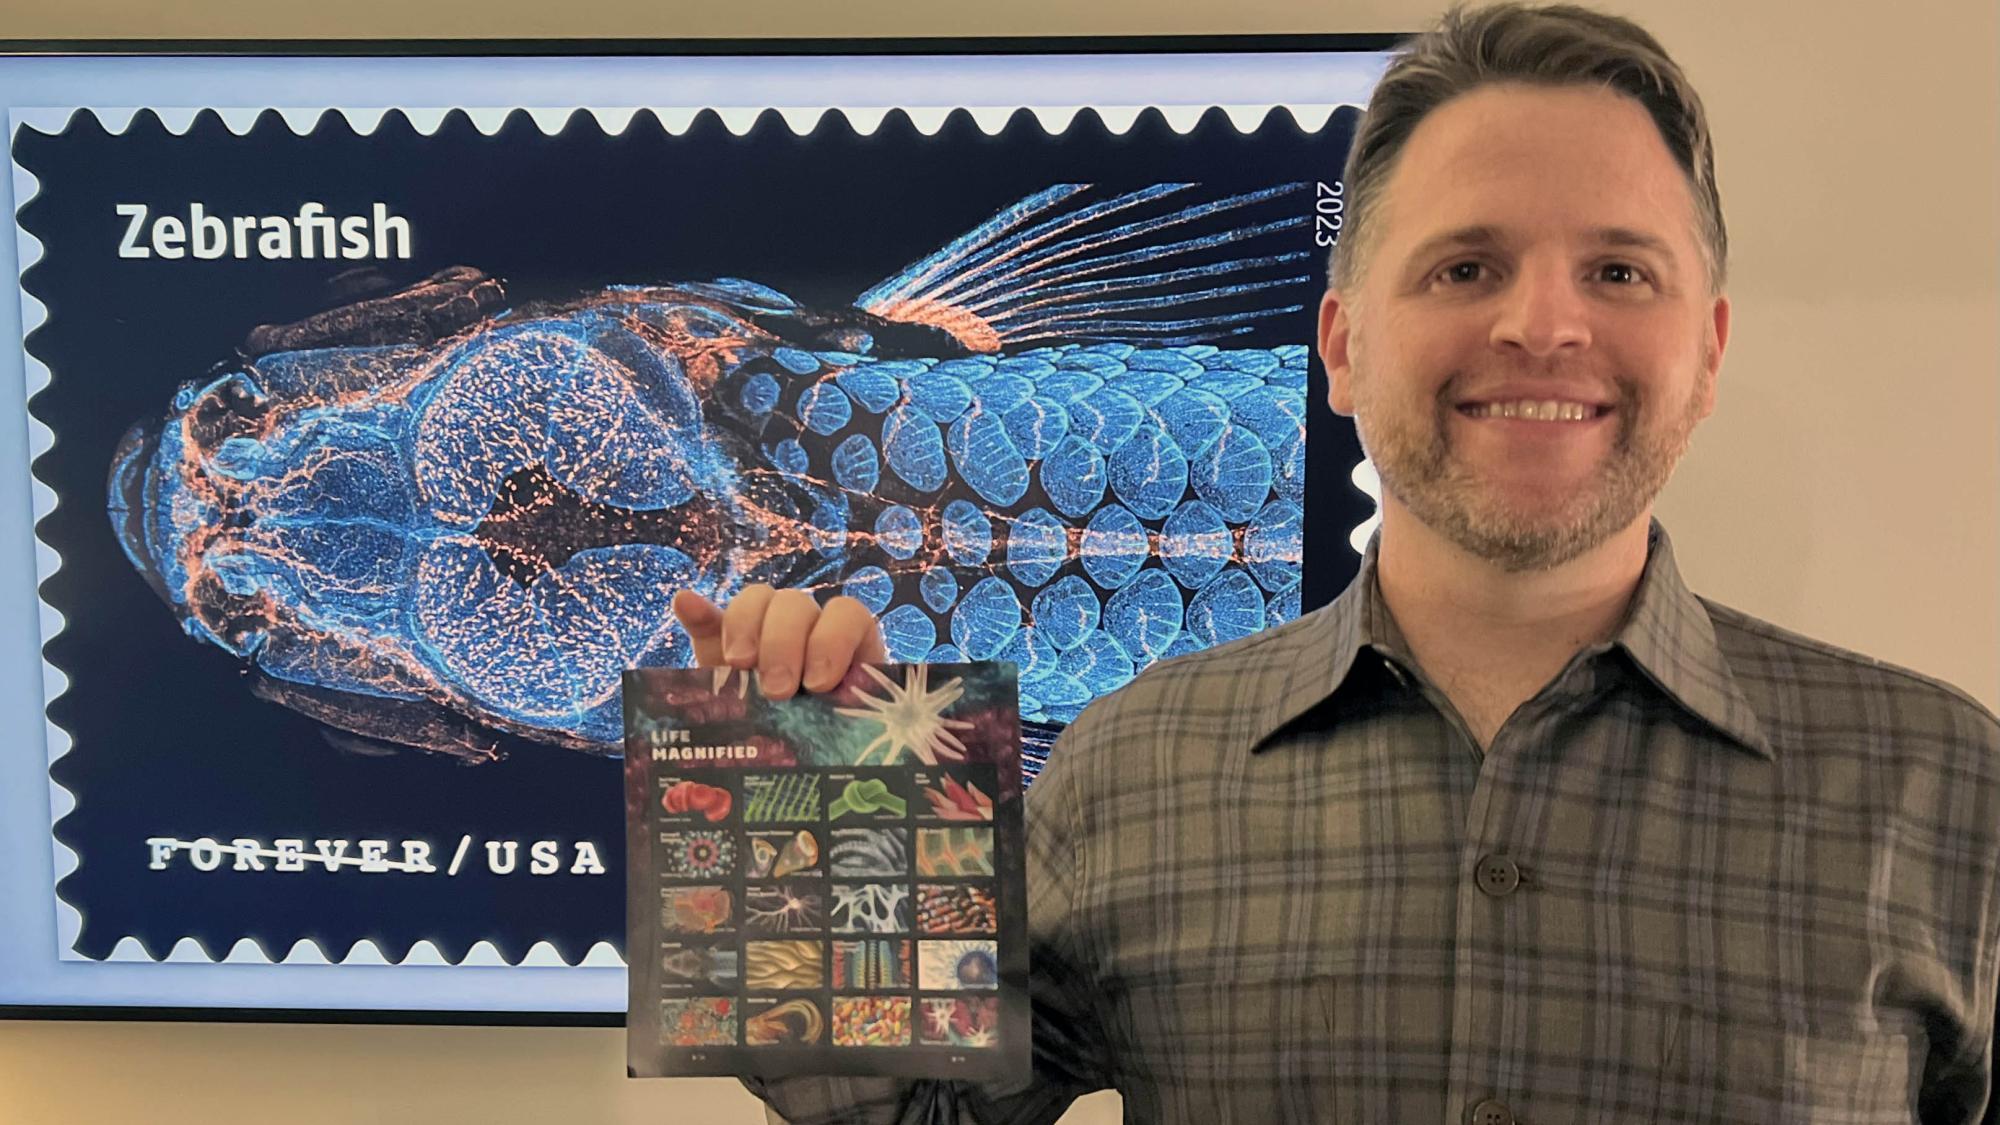 ANSC Alum with USPS Forever stamp